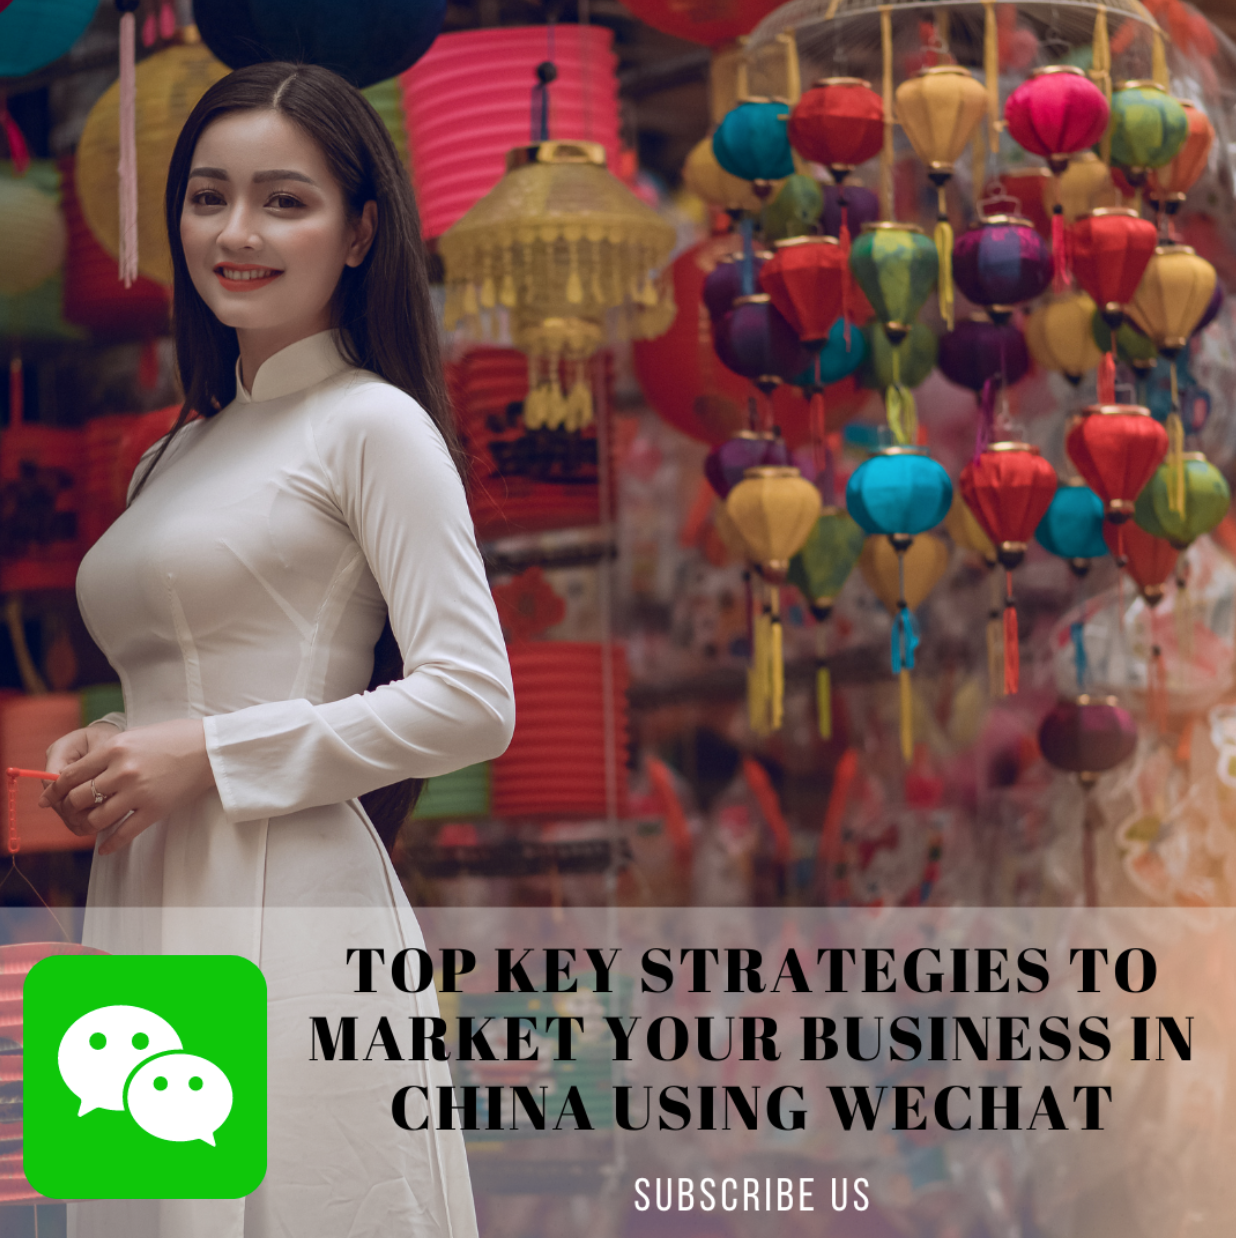 Top Key Strategies to Market Your Business in China using WeChat 